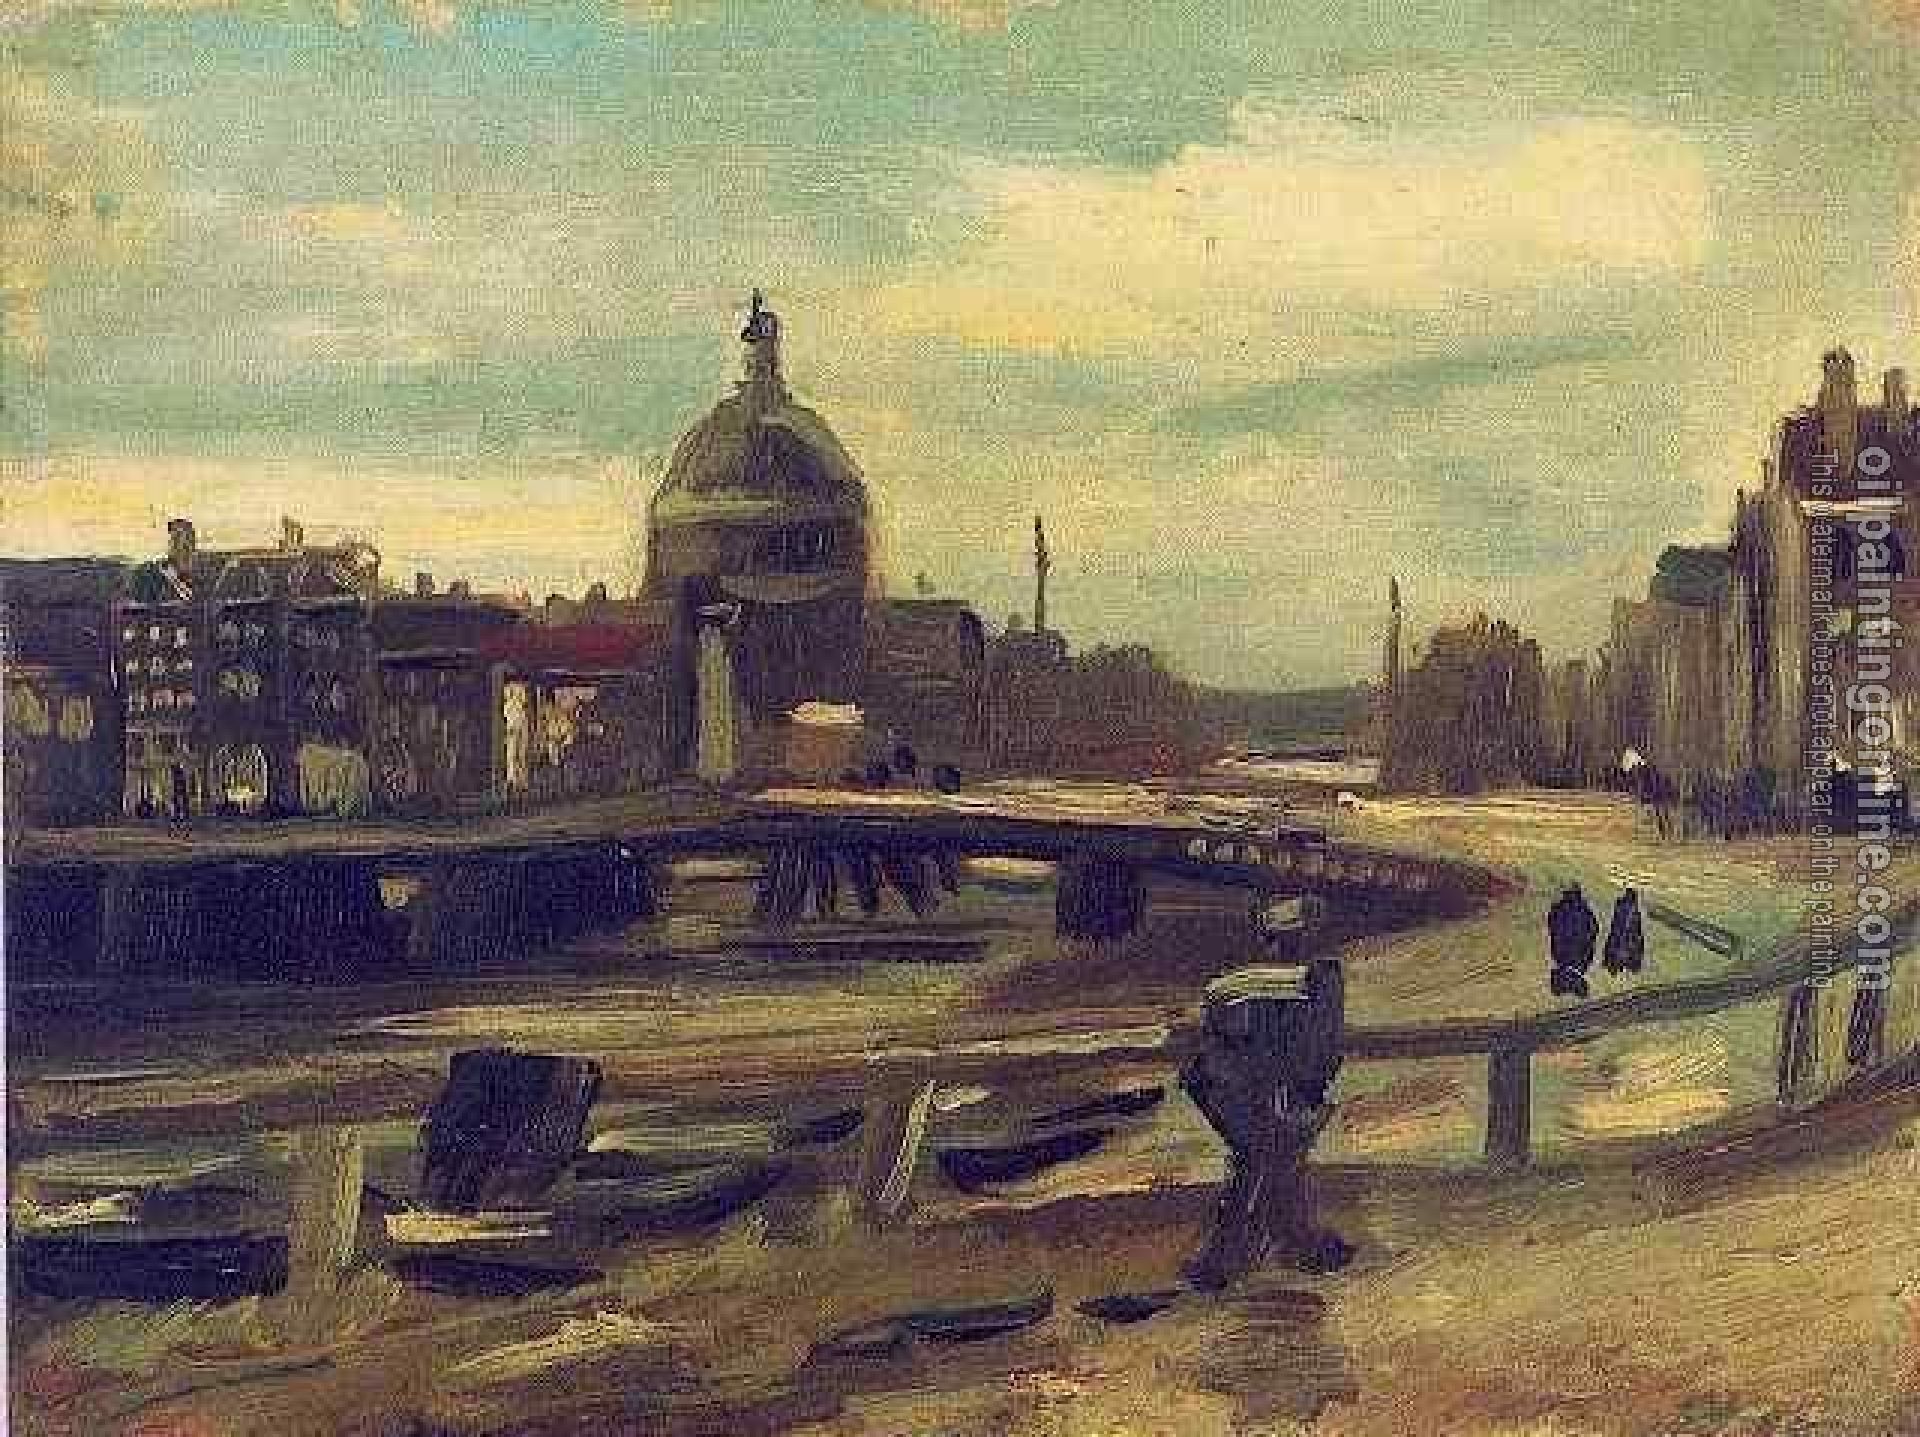 Gogh, Vincent van - View of Amsterdam from Central Station